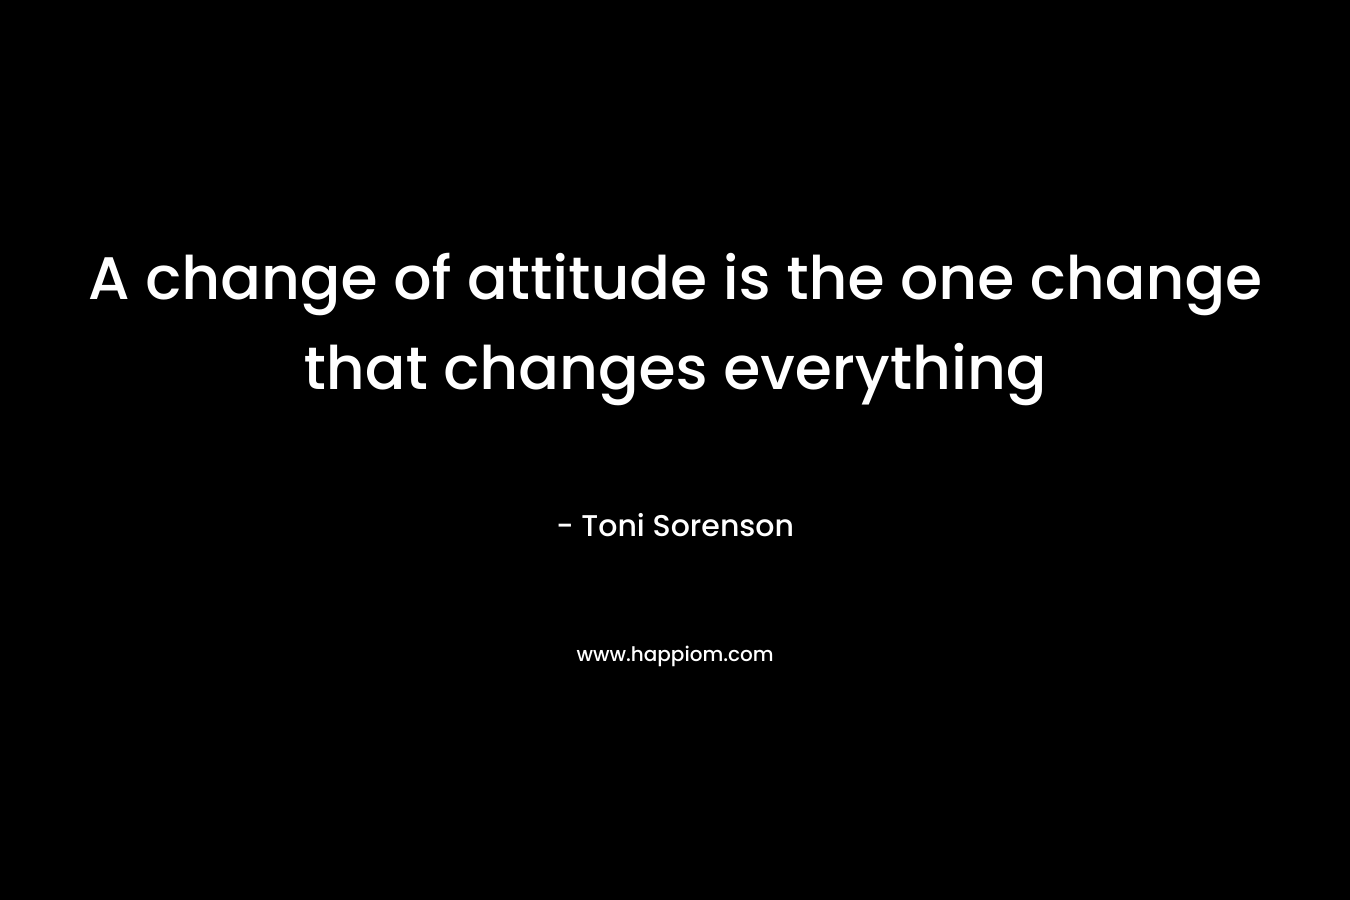 A change of attitude is the one change that changes everything